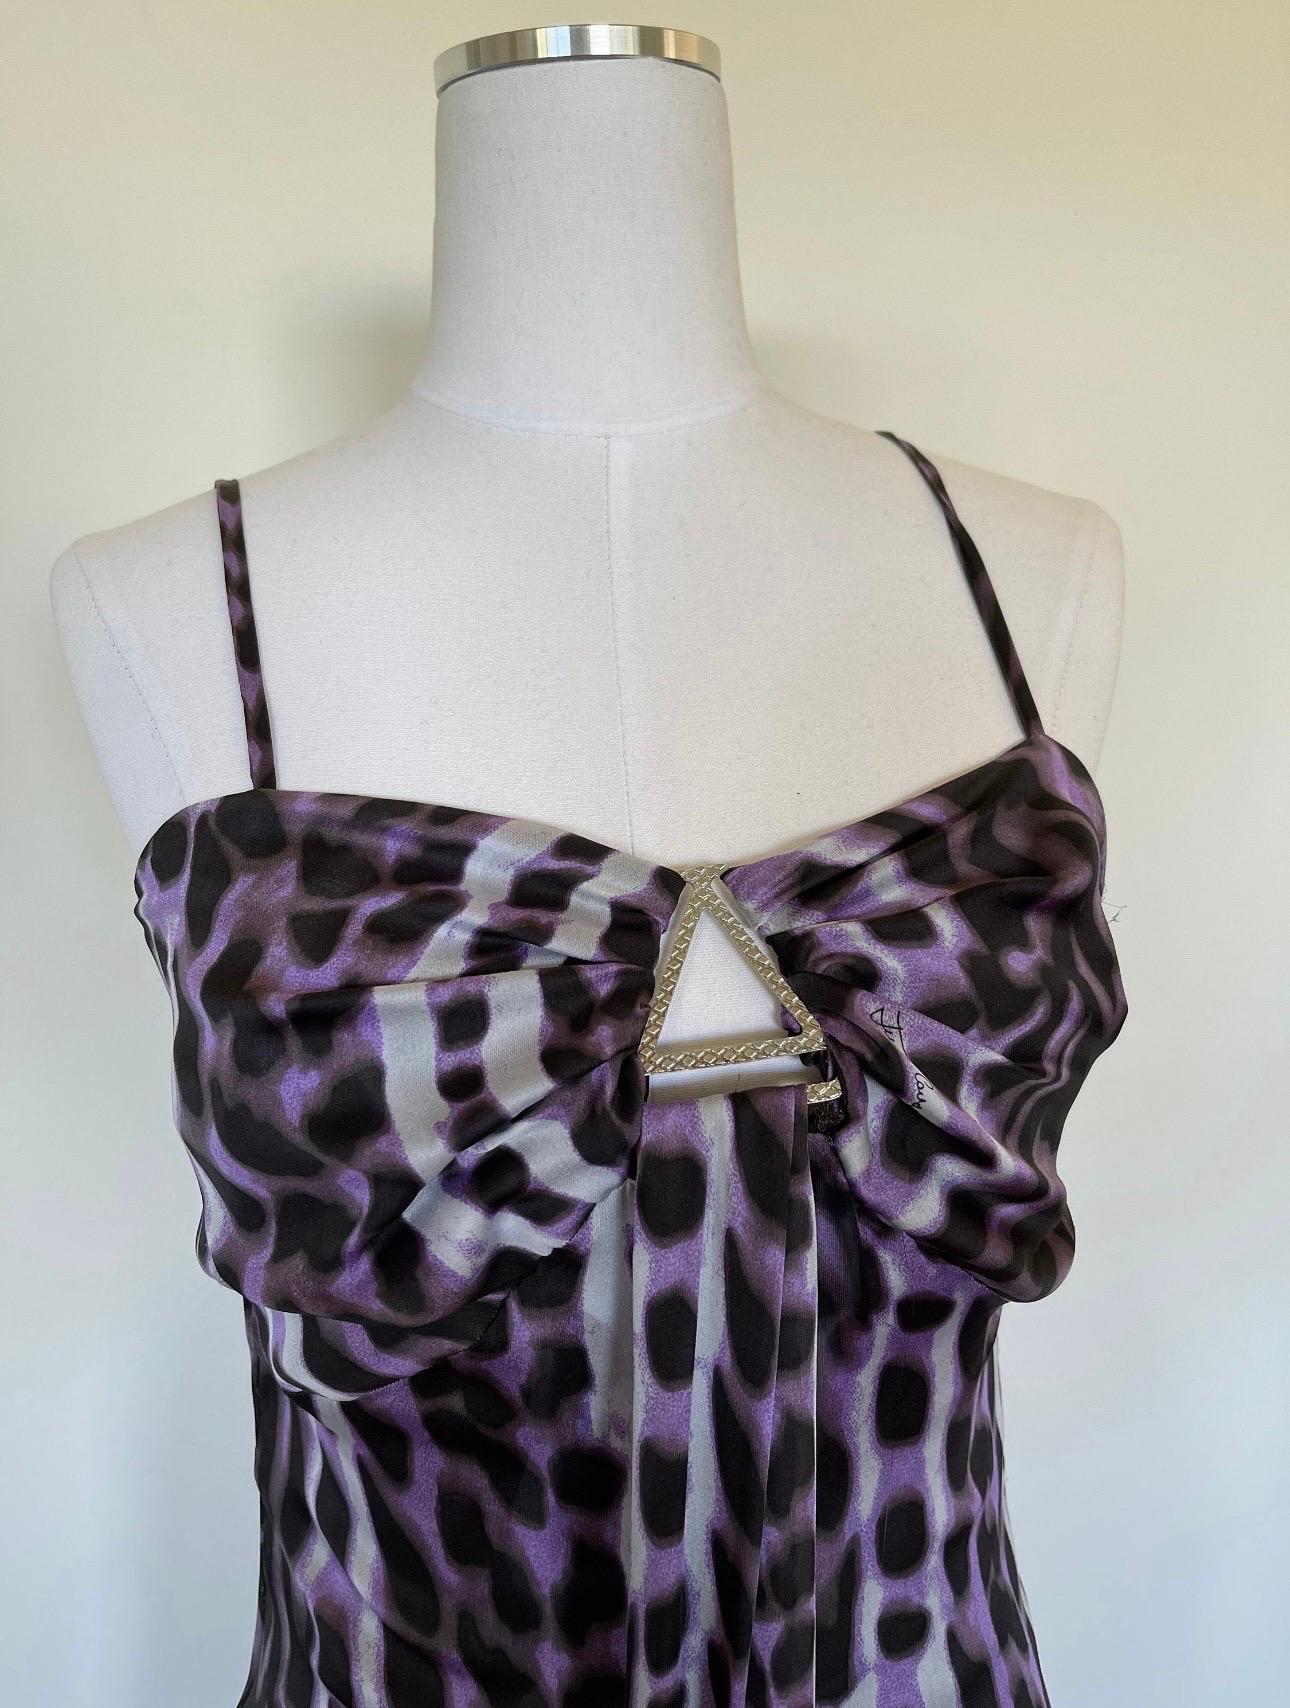 Vintage Roberto Cavalli Just Cavalli Leopard Print Silk Evening Gown Dress Frock In Excellent Condition For Sale In Malibu, CA